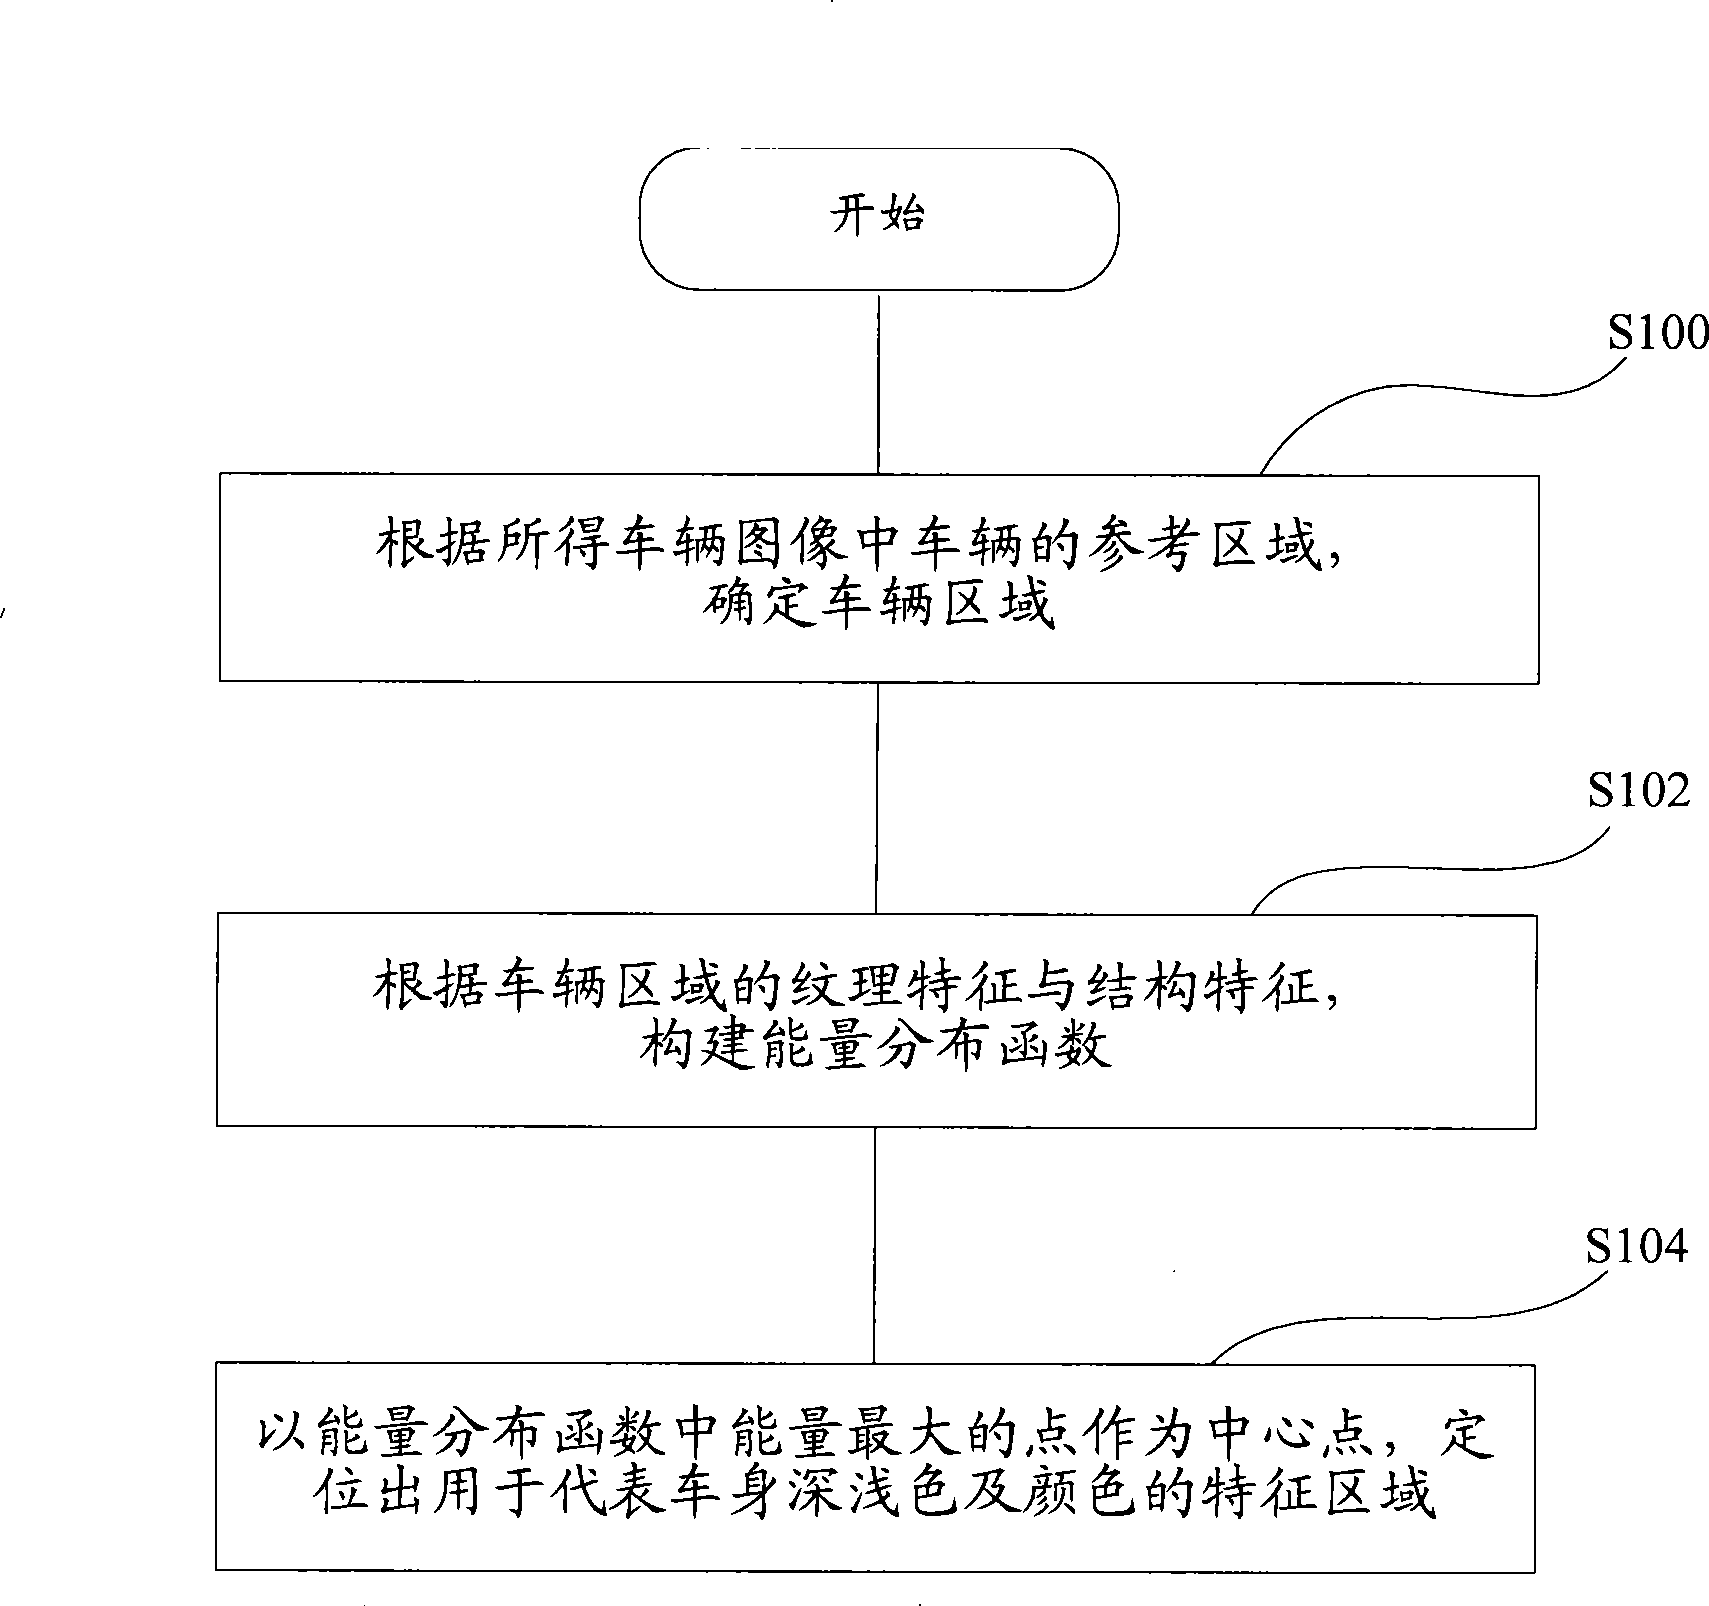 Characteristic area positioning method, car body color depth and color recognition method